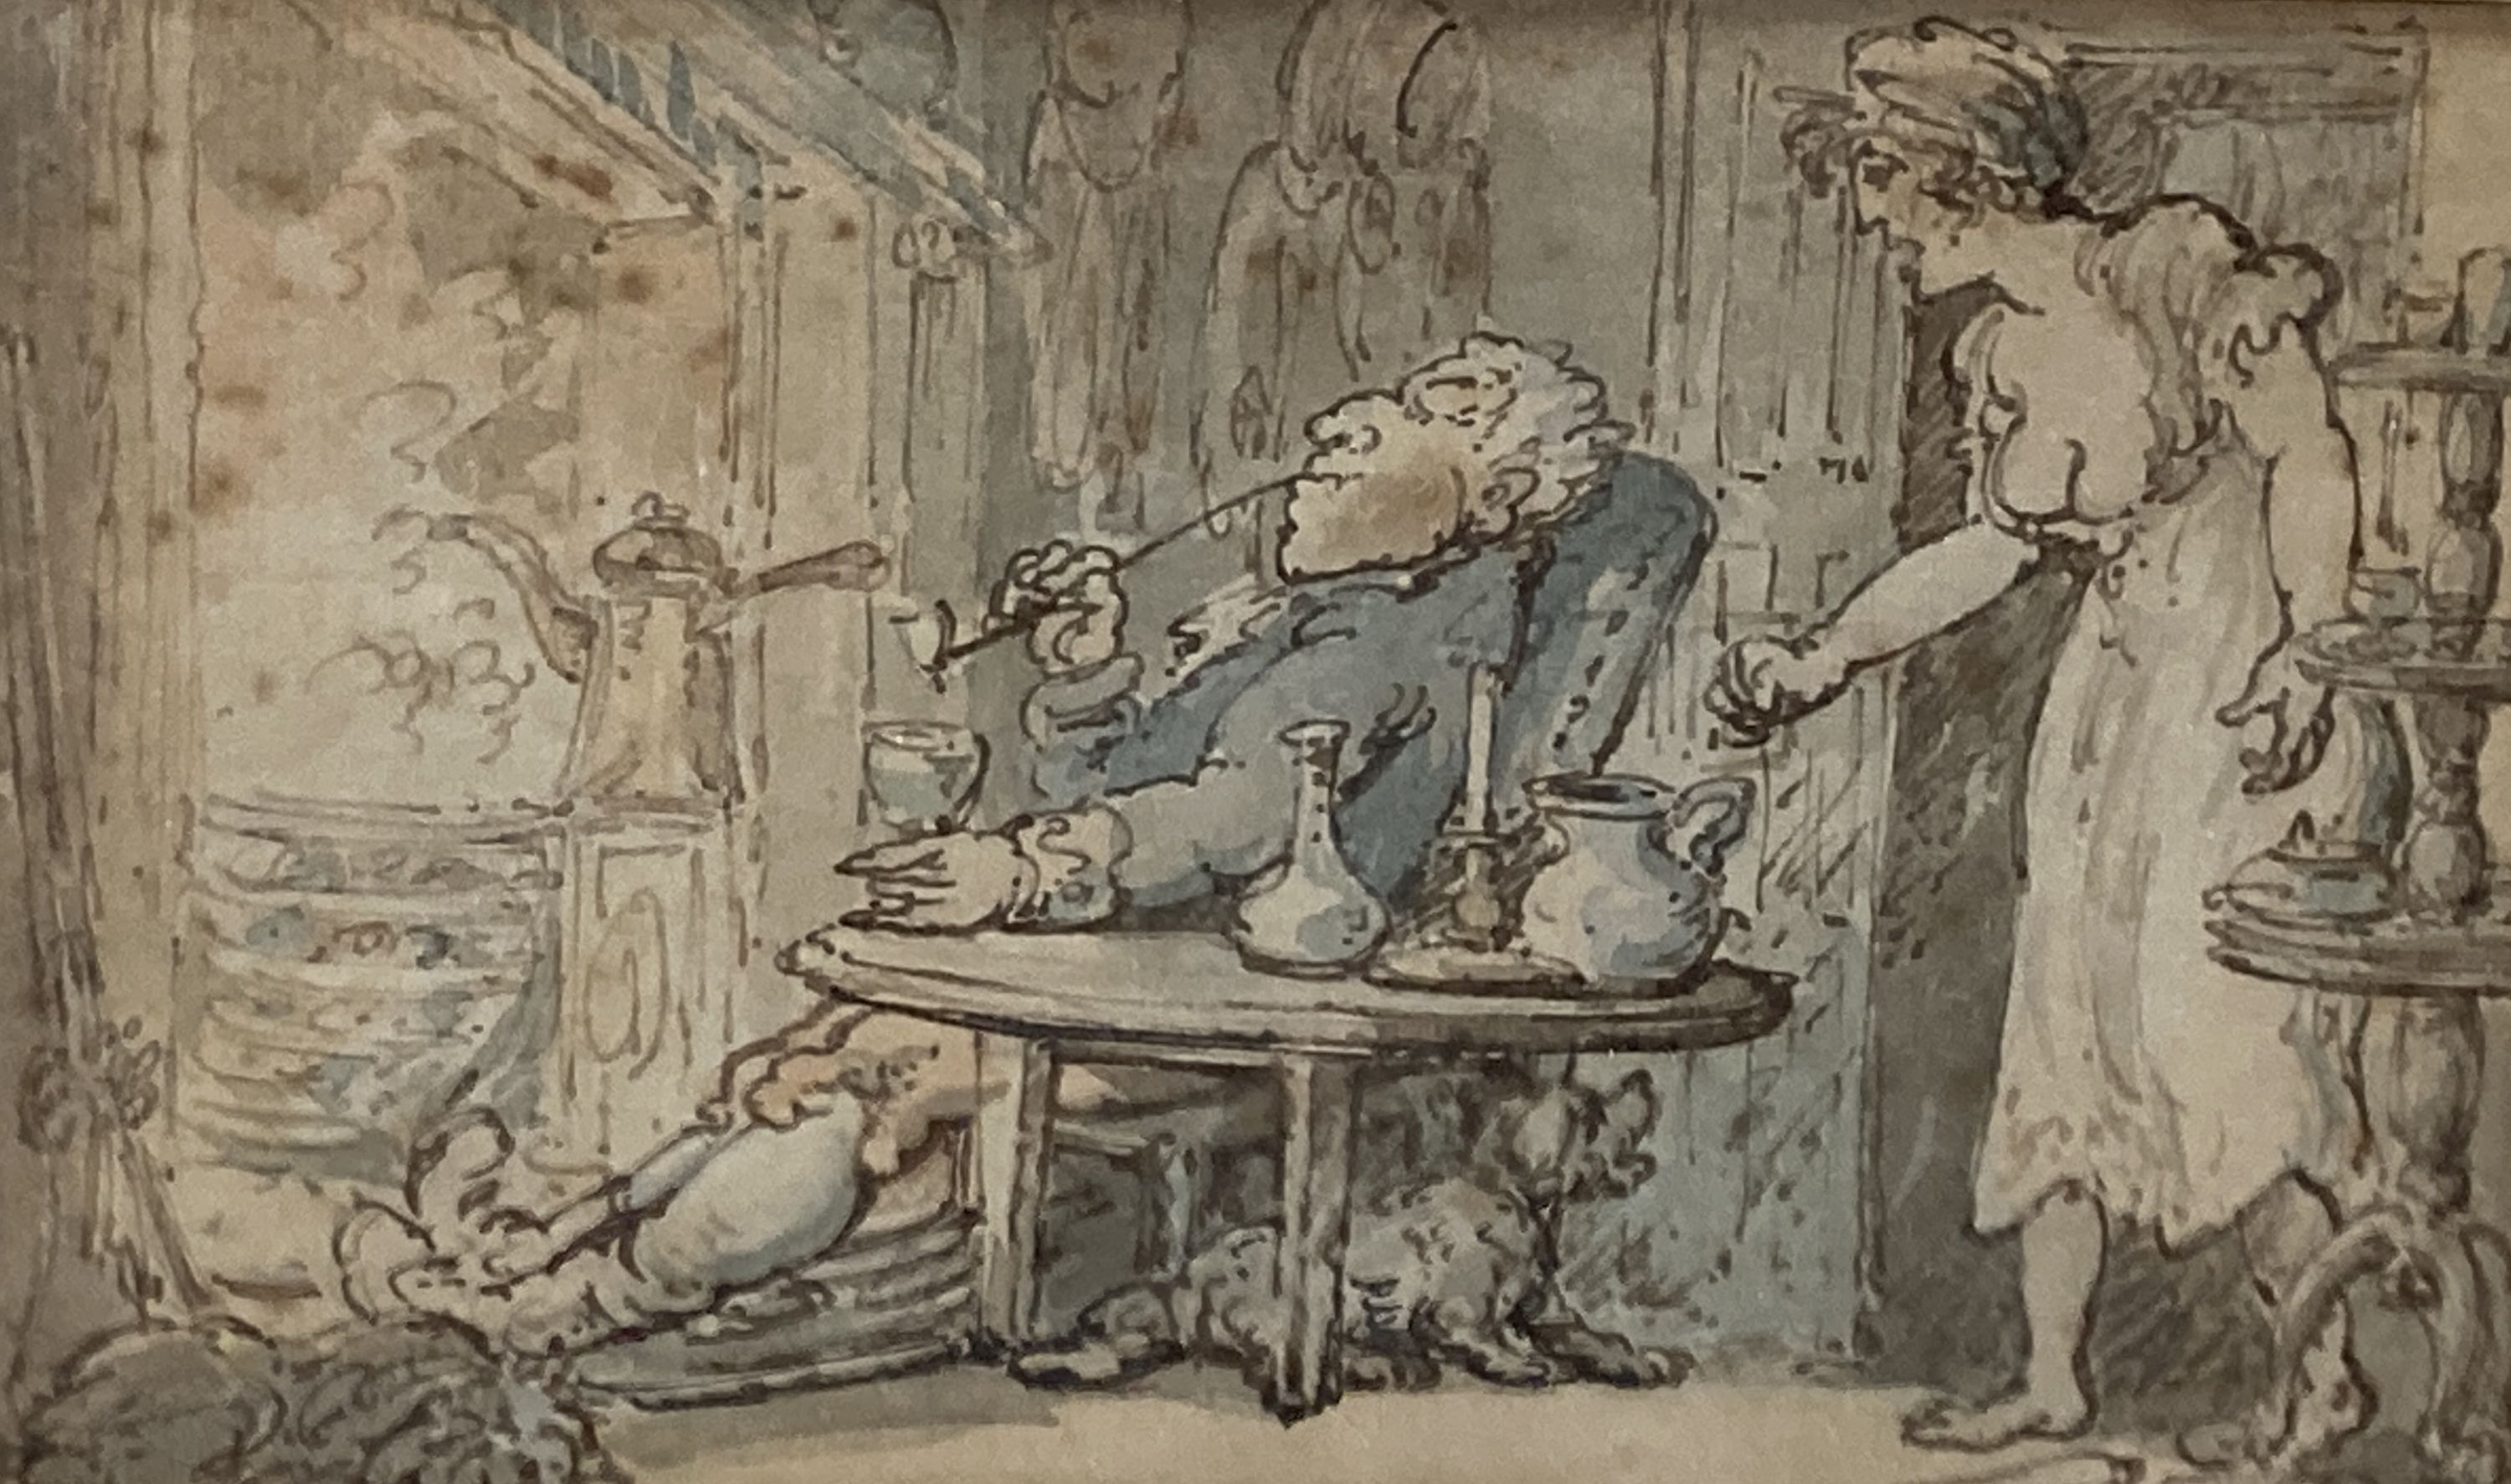 Attributed to Thomas Rowlandson (1757-1827), interior with figures, watercolour, 8.5 x 14cm